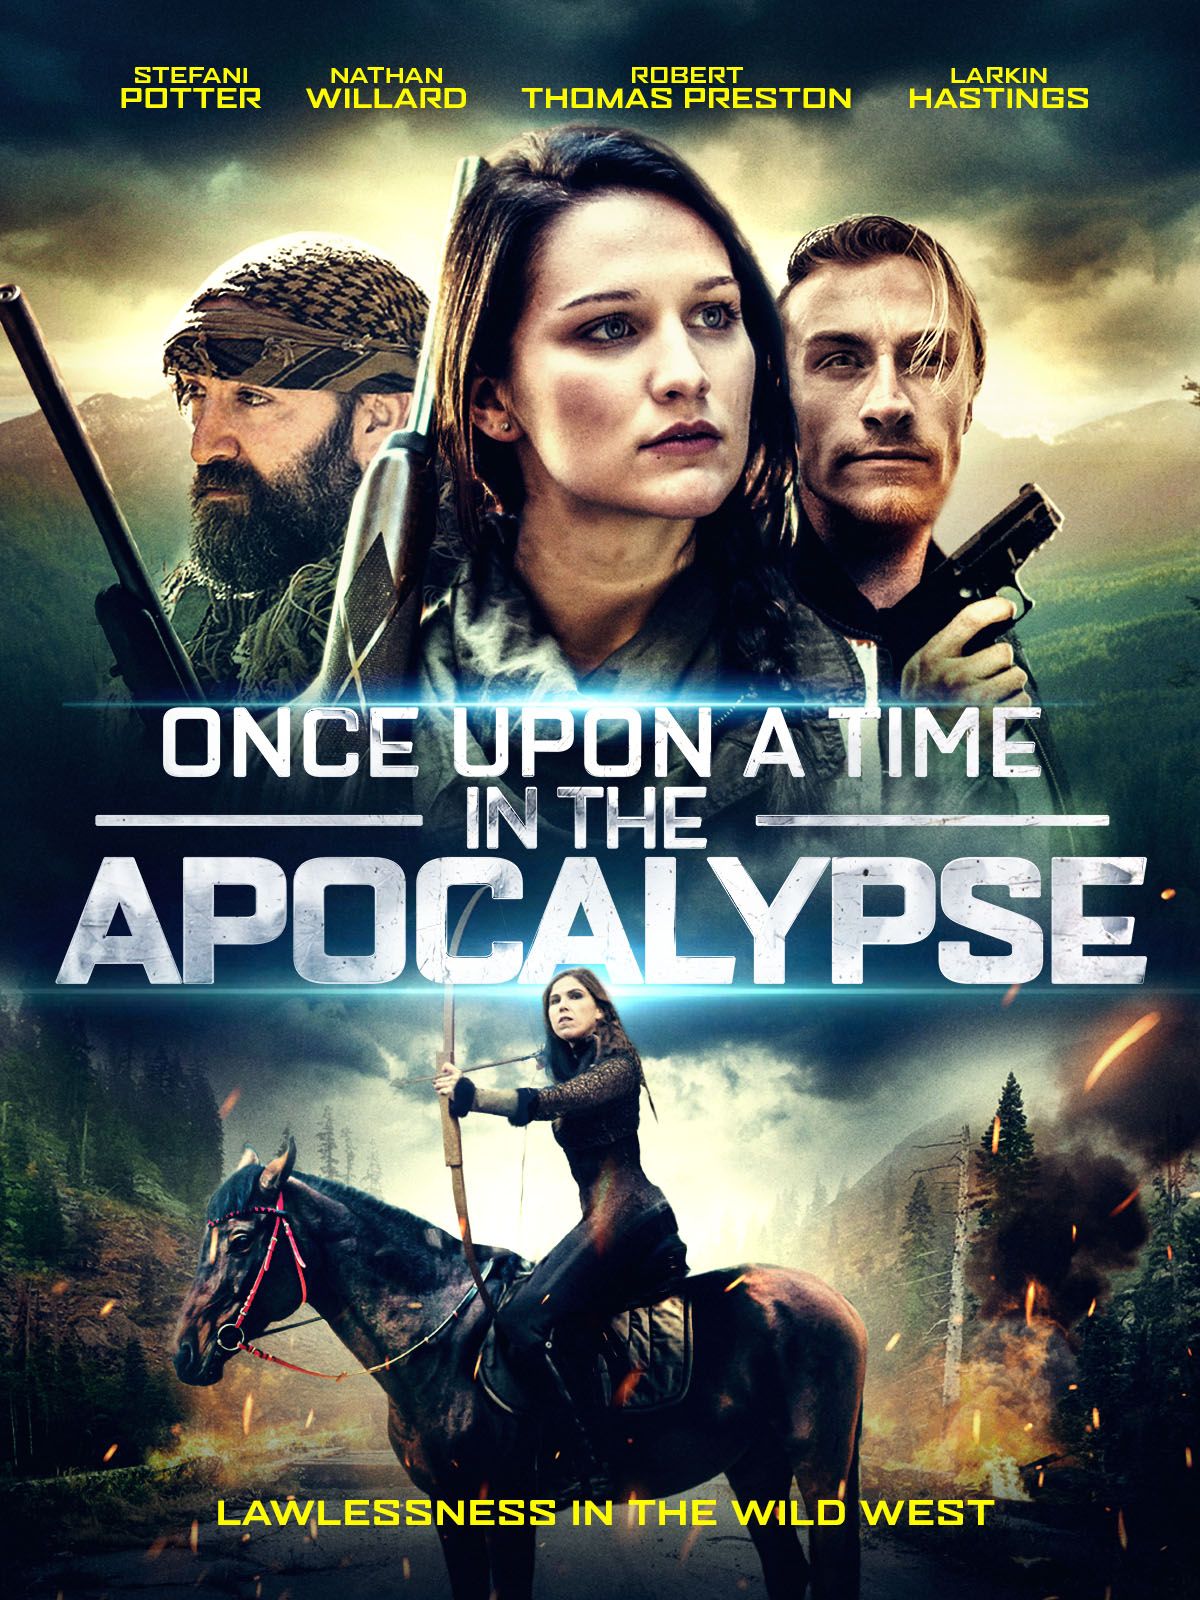 Keyart for the movie Once Upon a Time in the Apocalypse